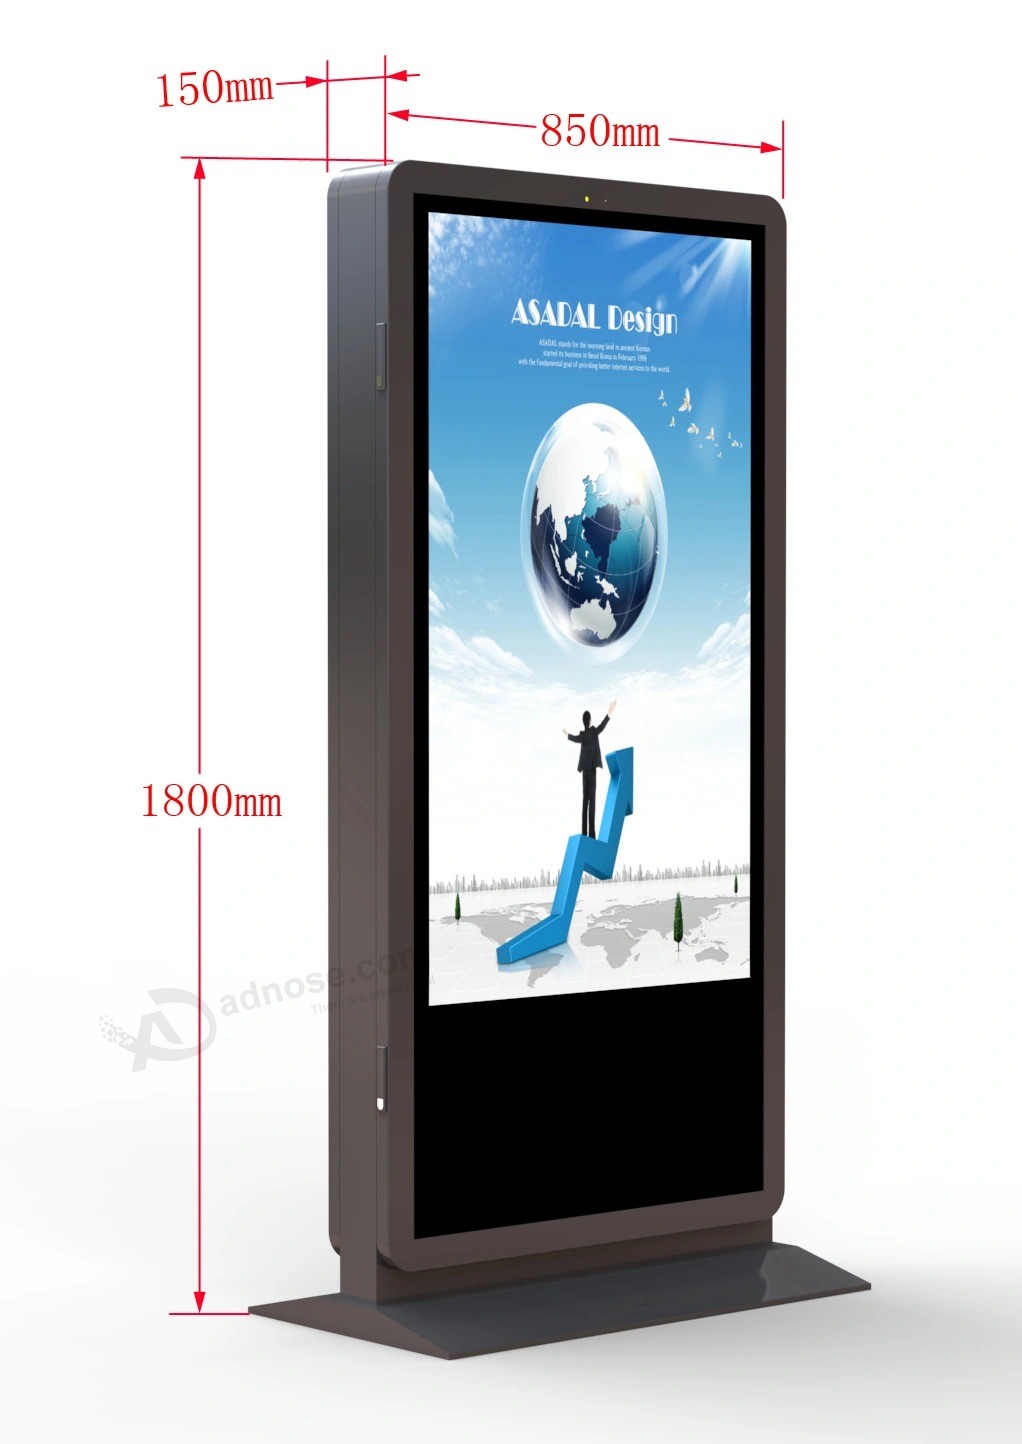 Factory Price Floor Standing 86 Inches Bus Shelter Digital Signage Kisosk with Light Box